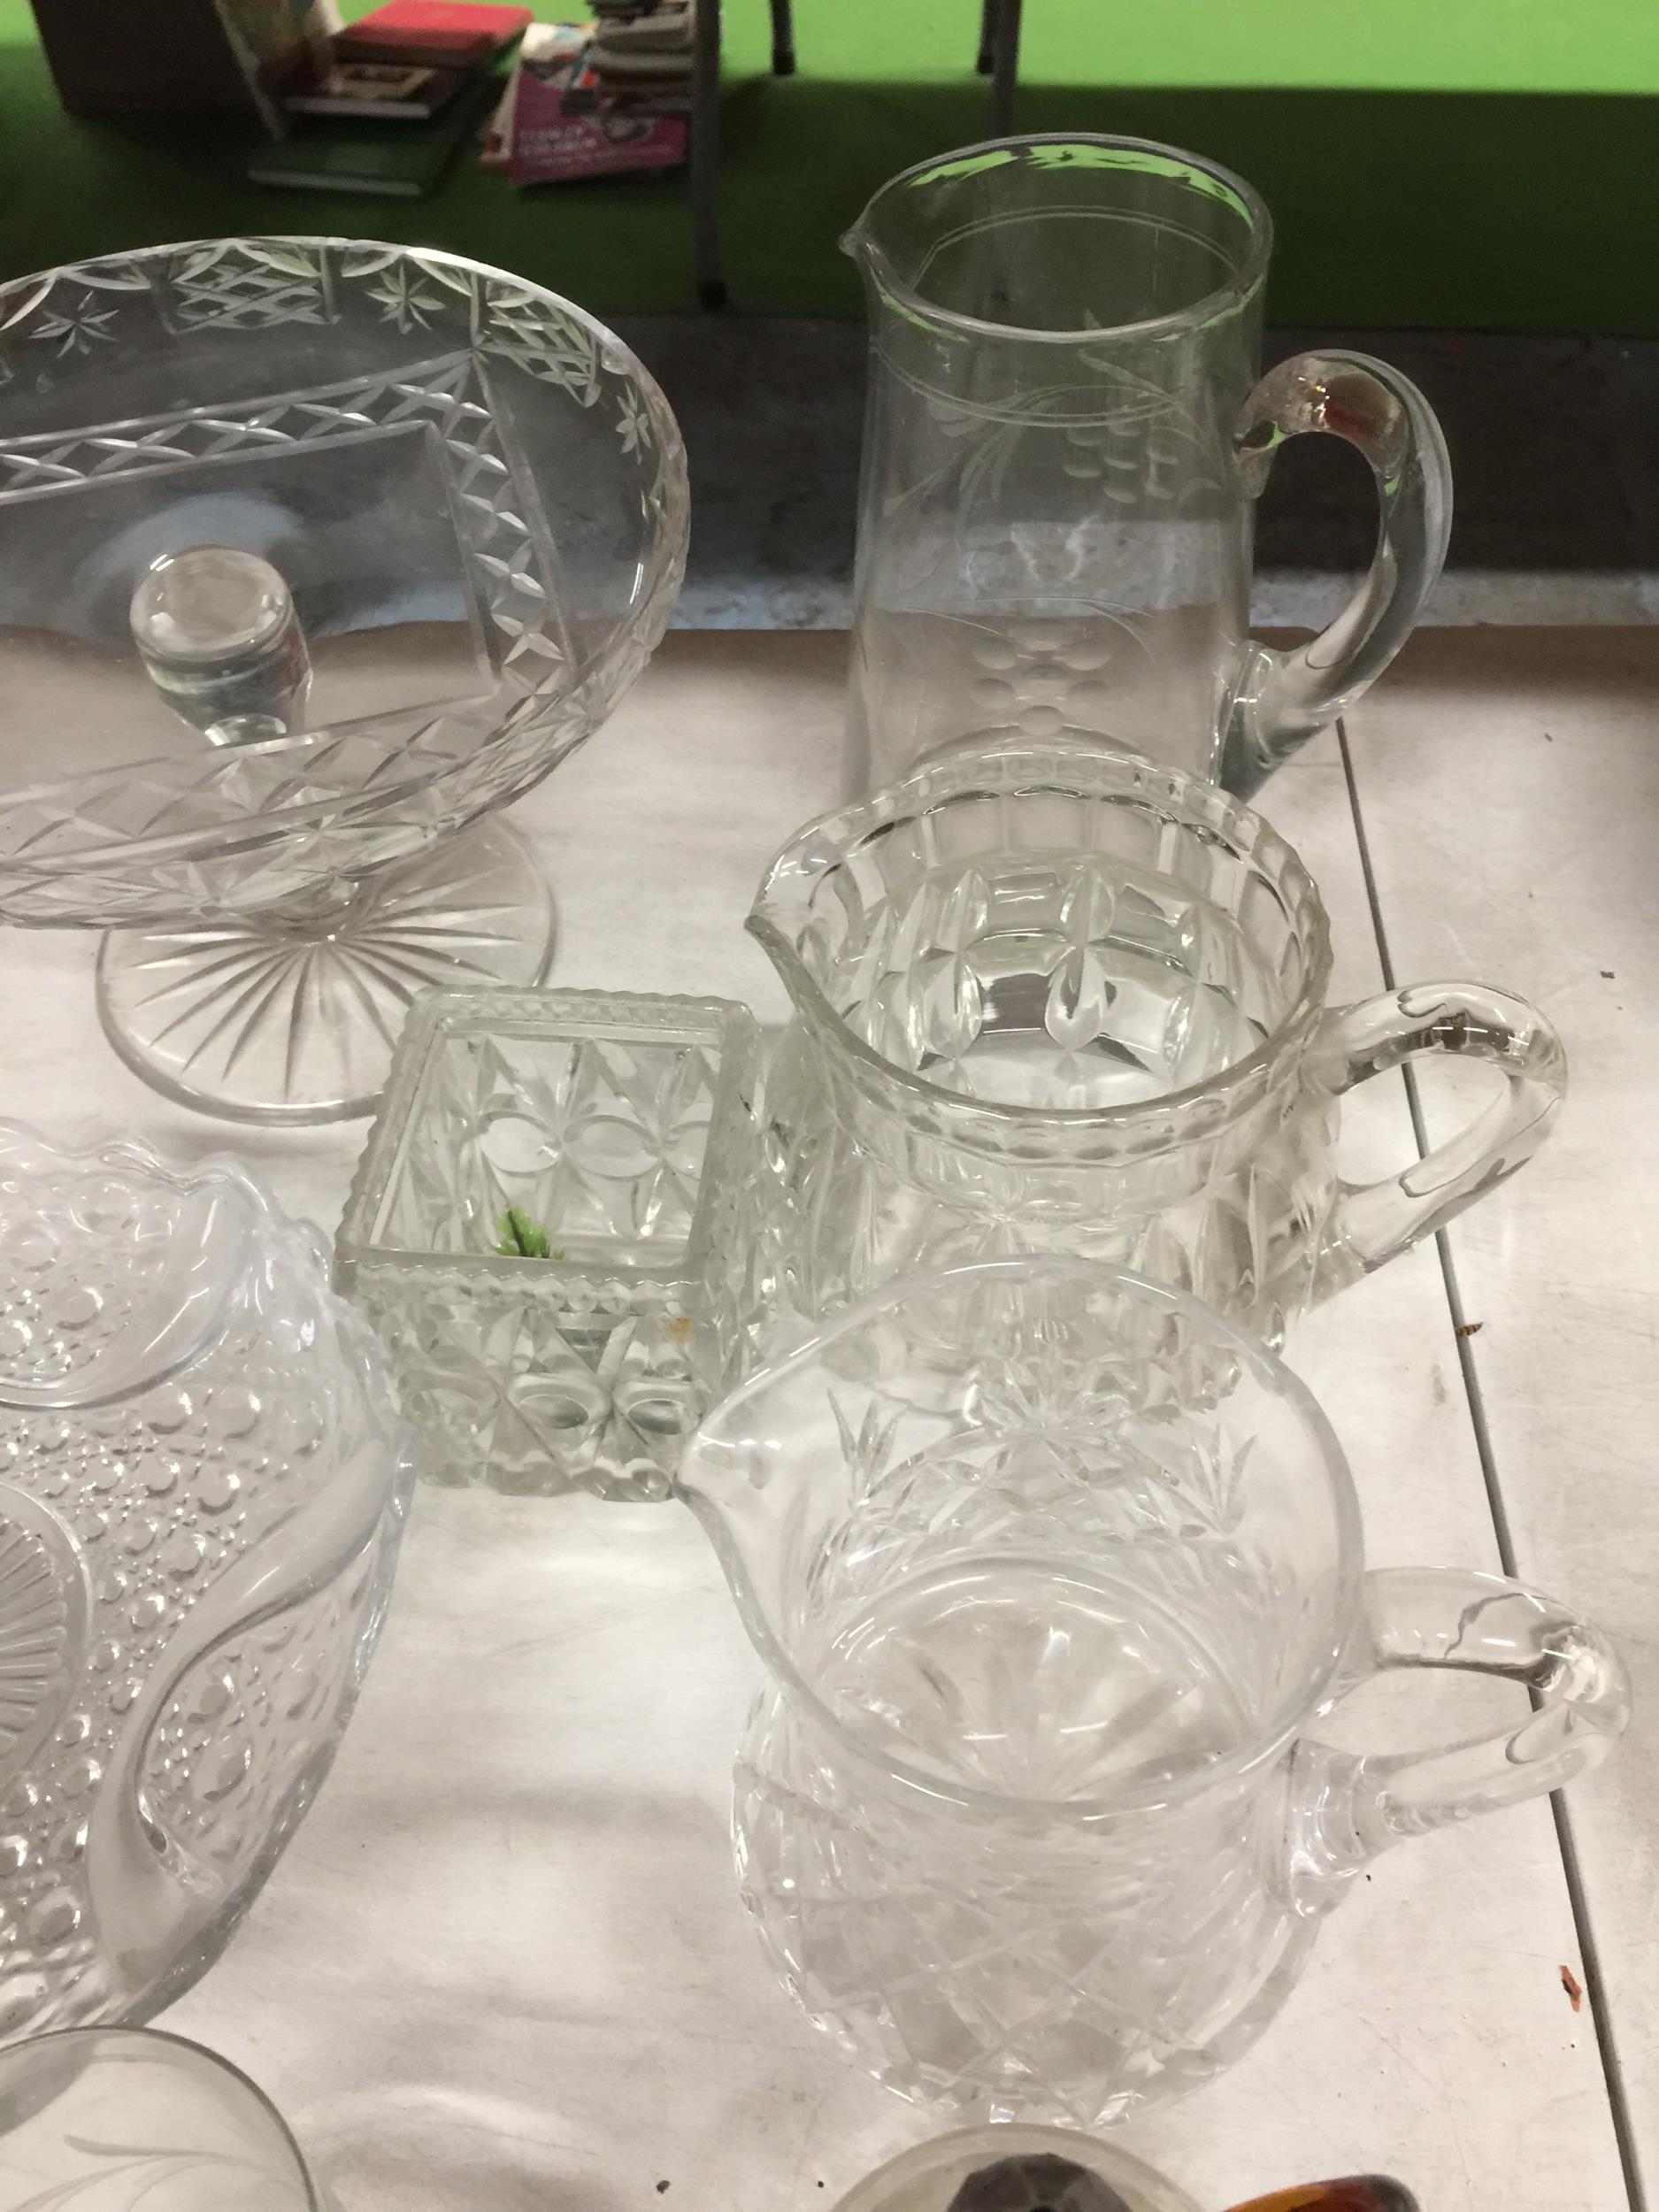 A QUANTITY OF GLASSWARE INCLUDING ETCHED TUMBLERS, CAKE STANDS, JUGS, ETC - Image 3 of 6